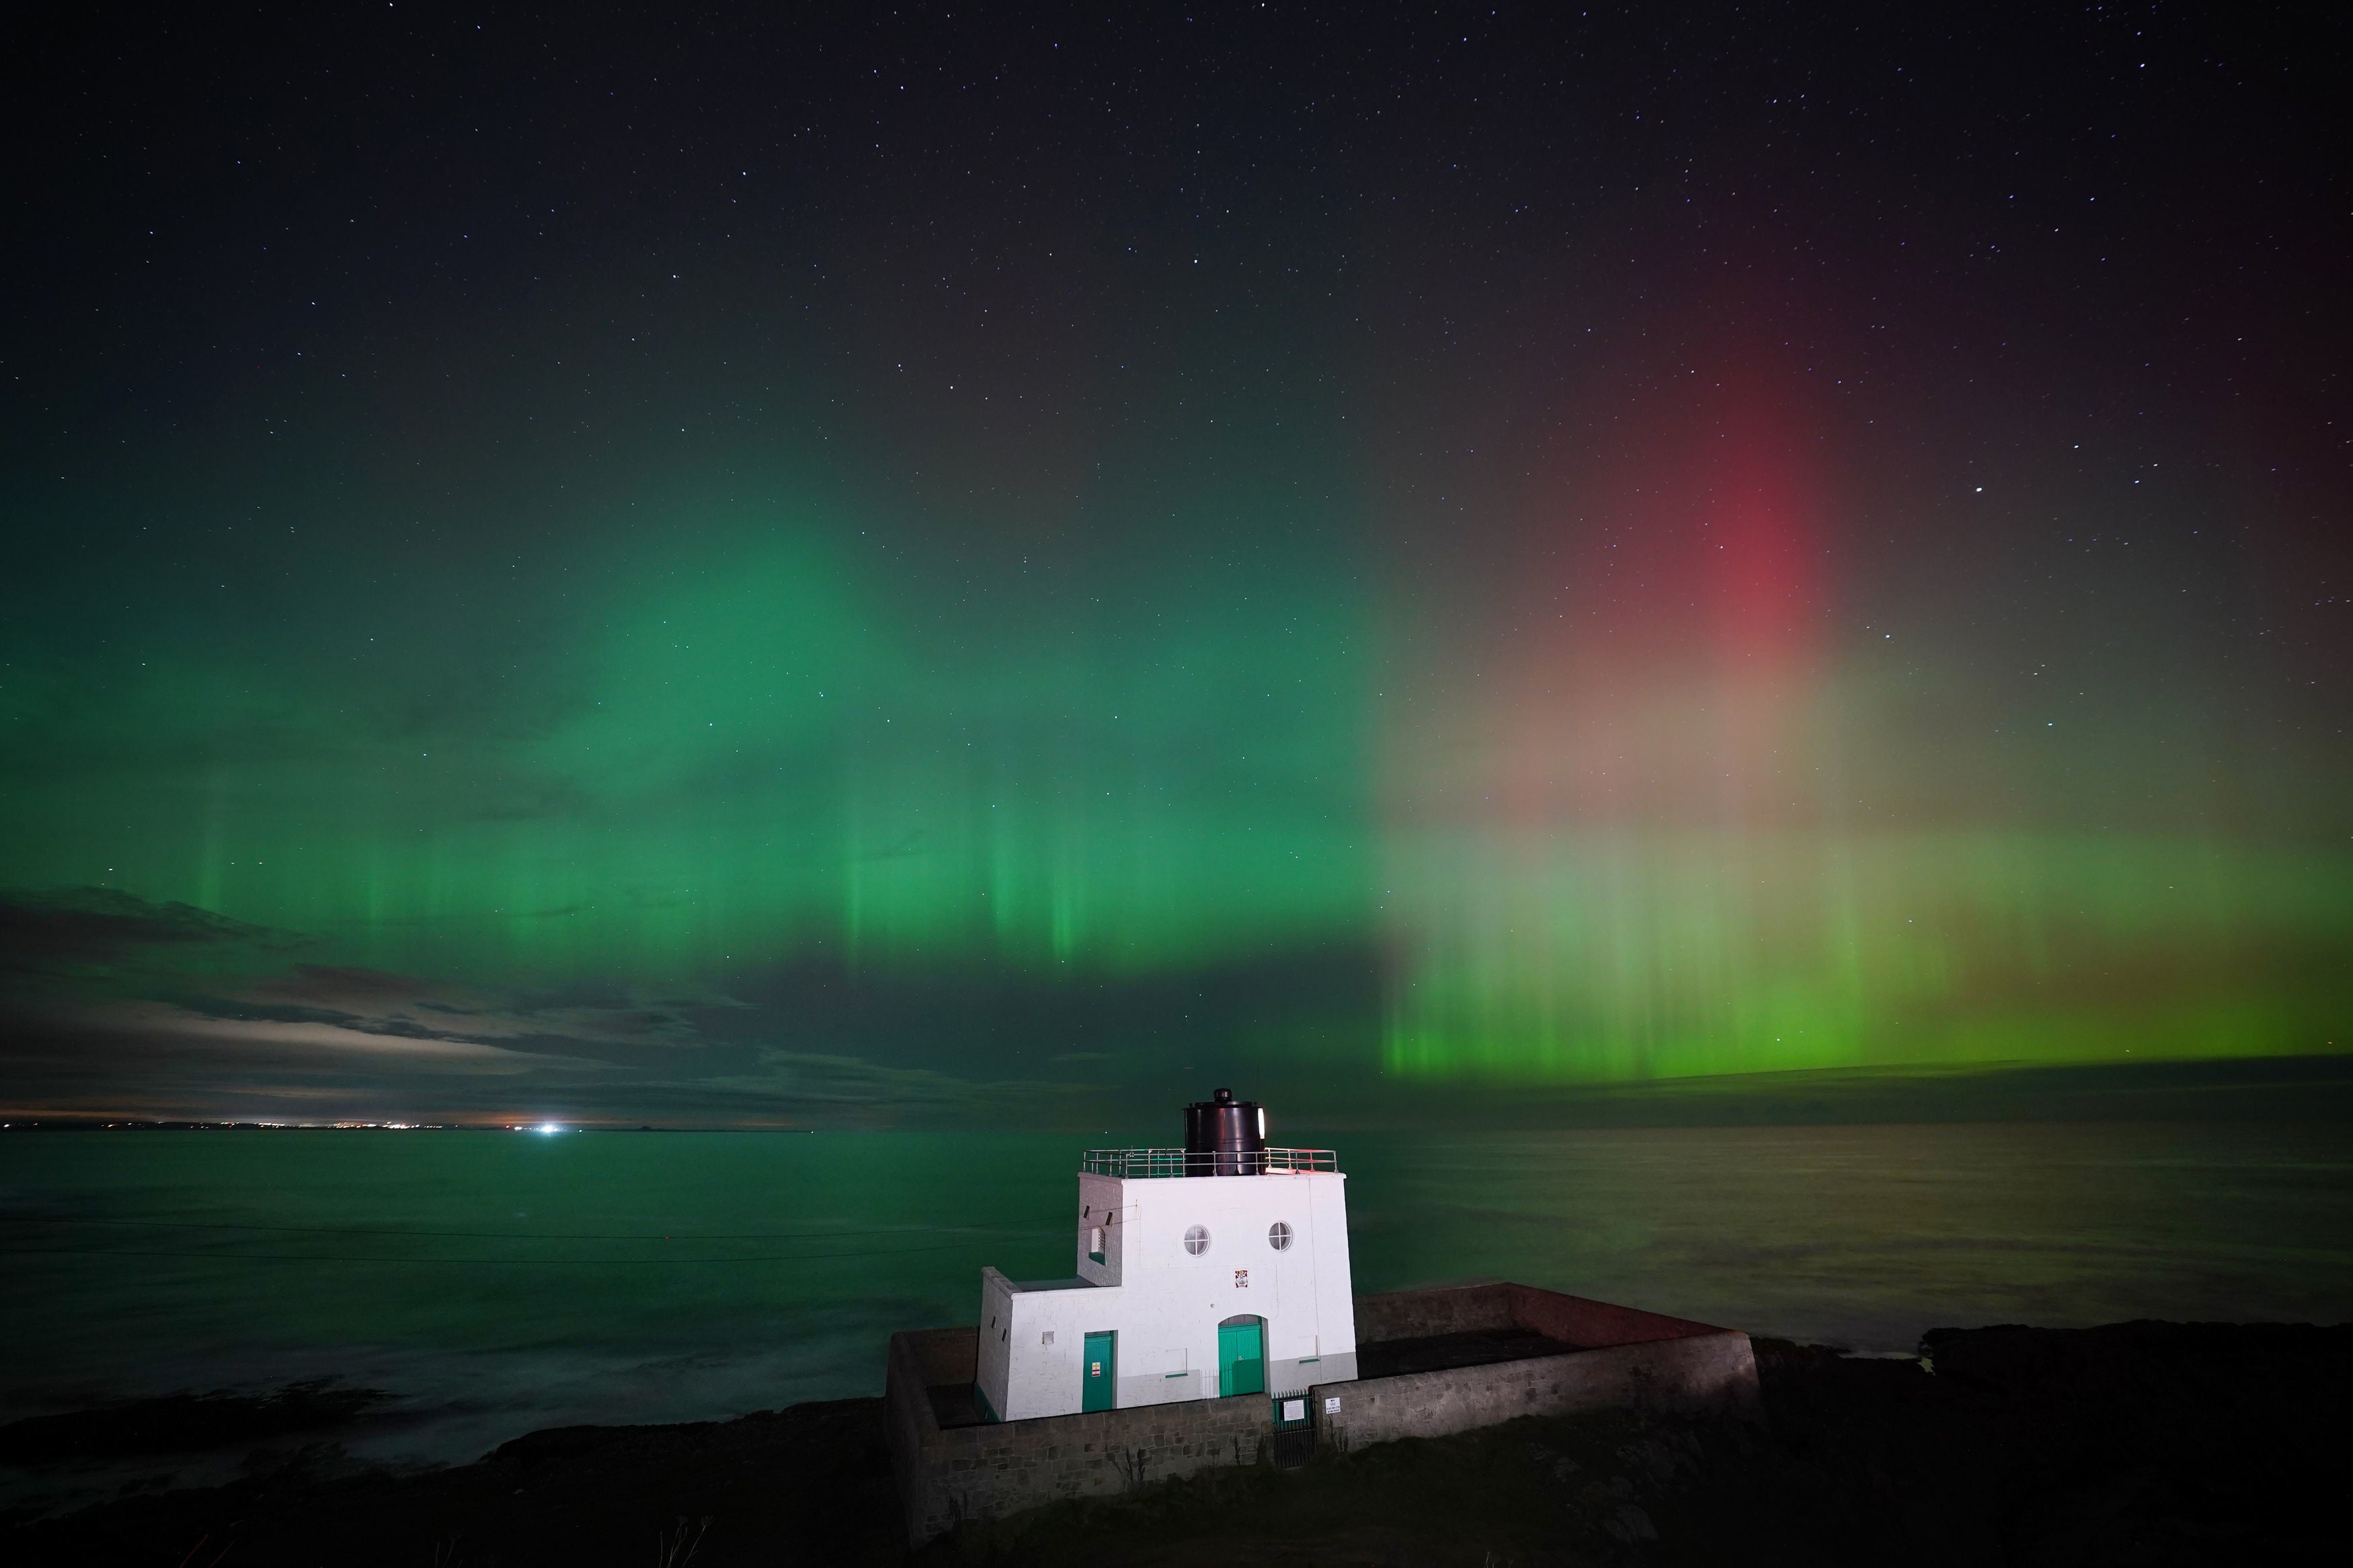 The aurora borealis, appeared over Bamburgh Lighthouse, in Northumberland, last month